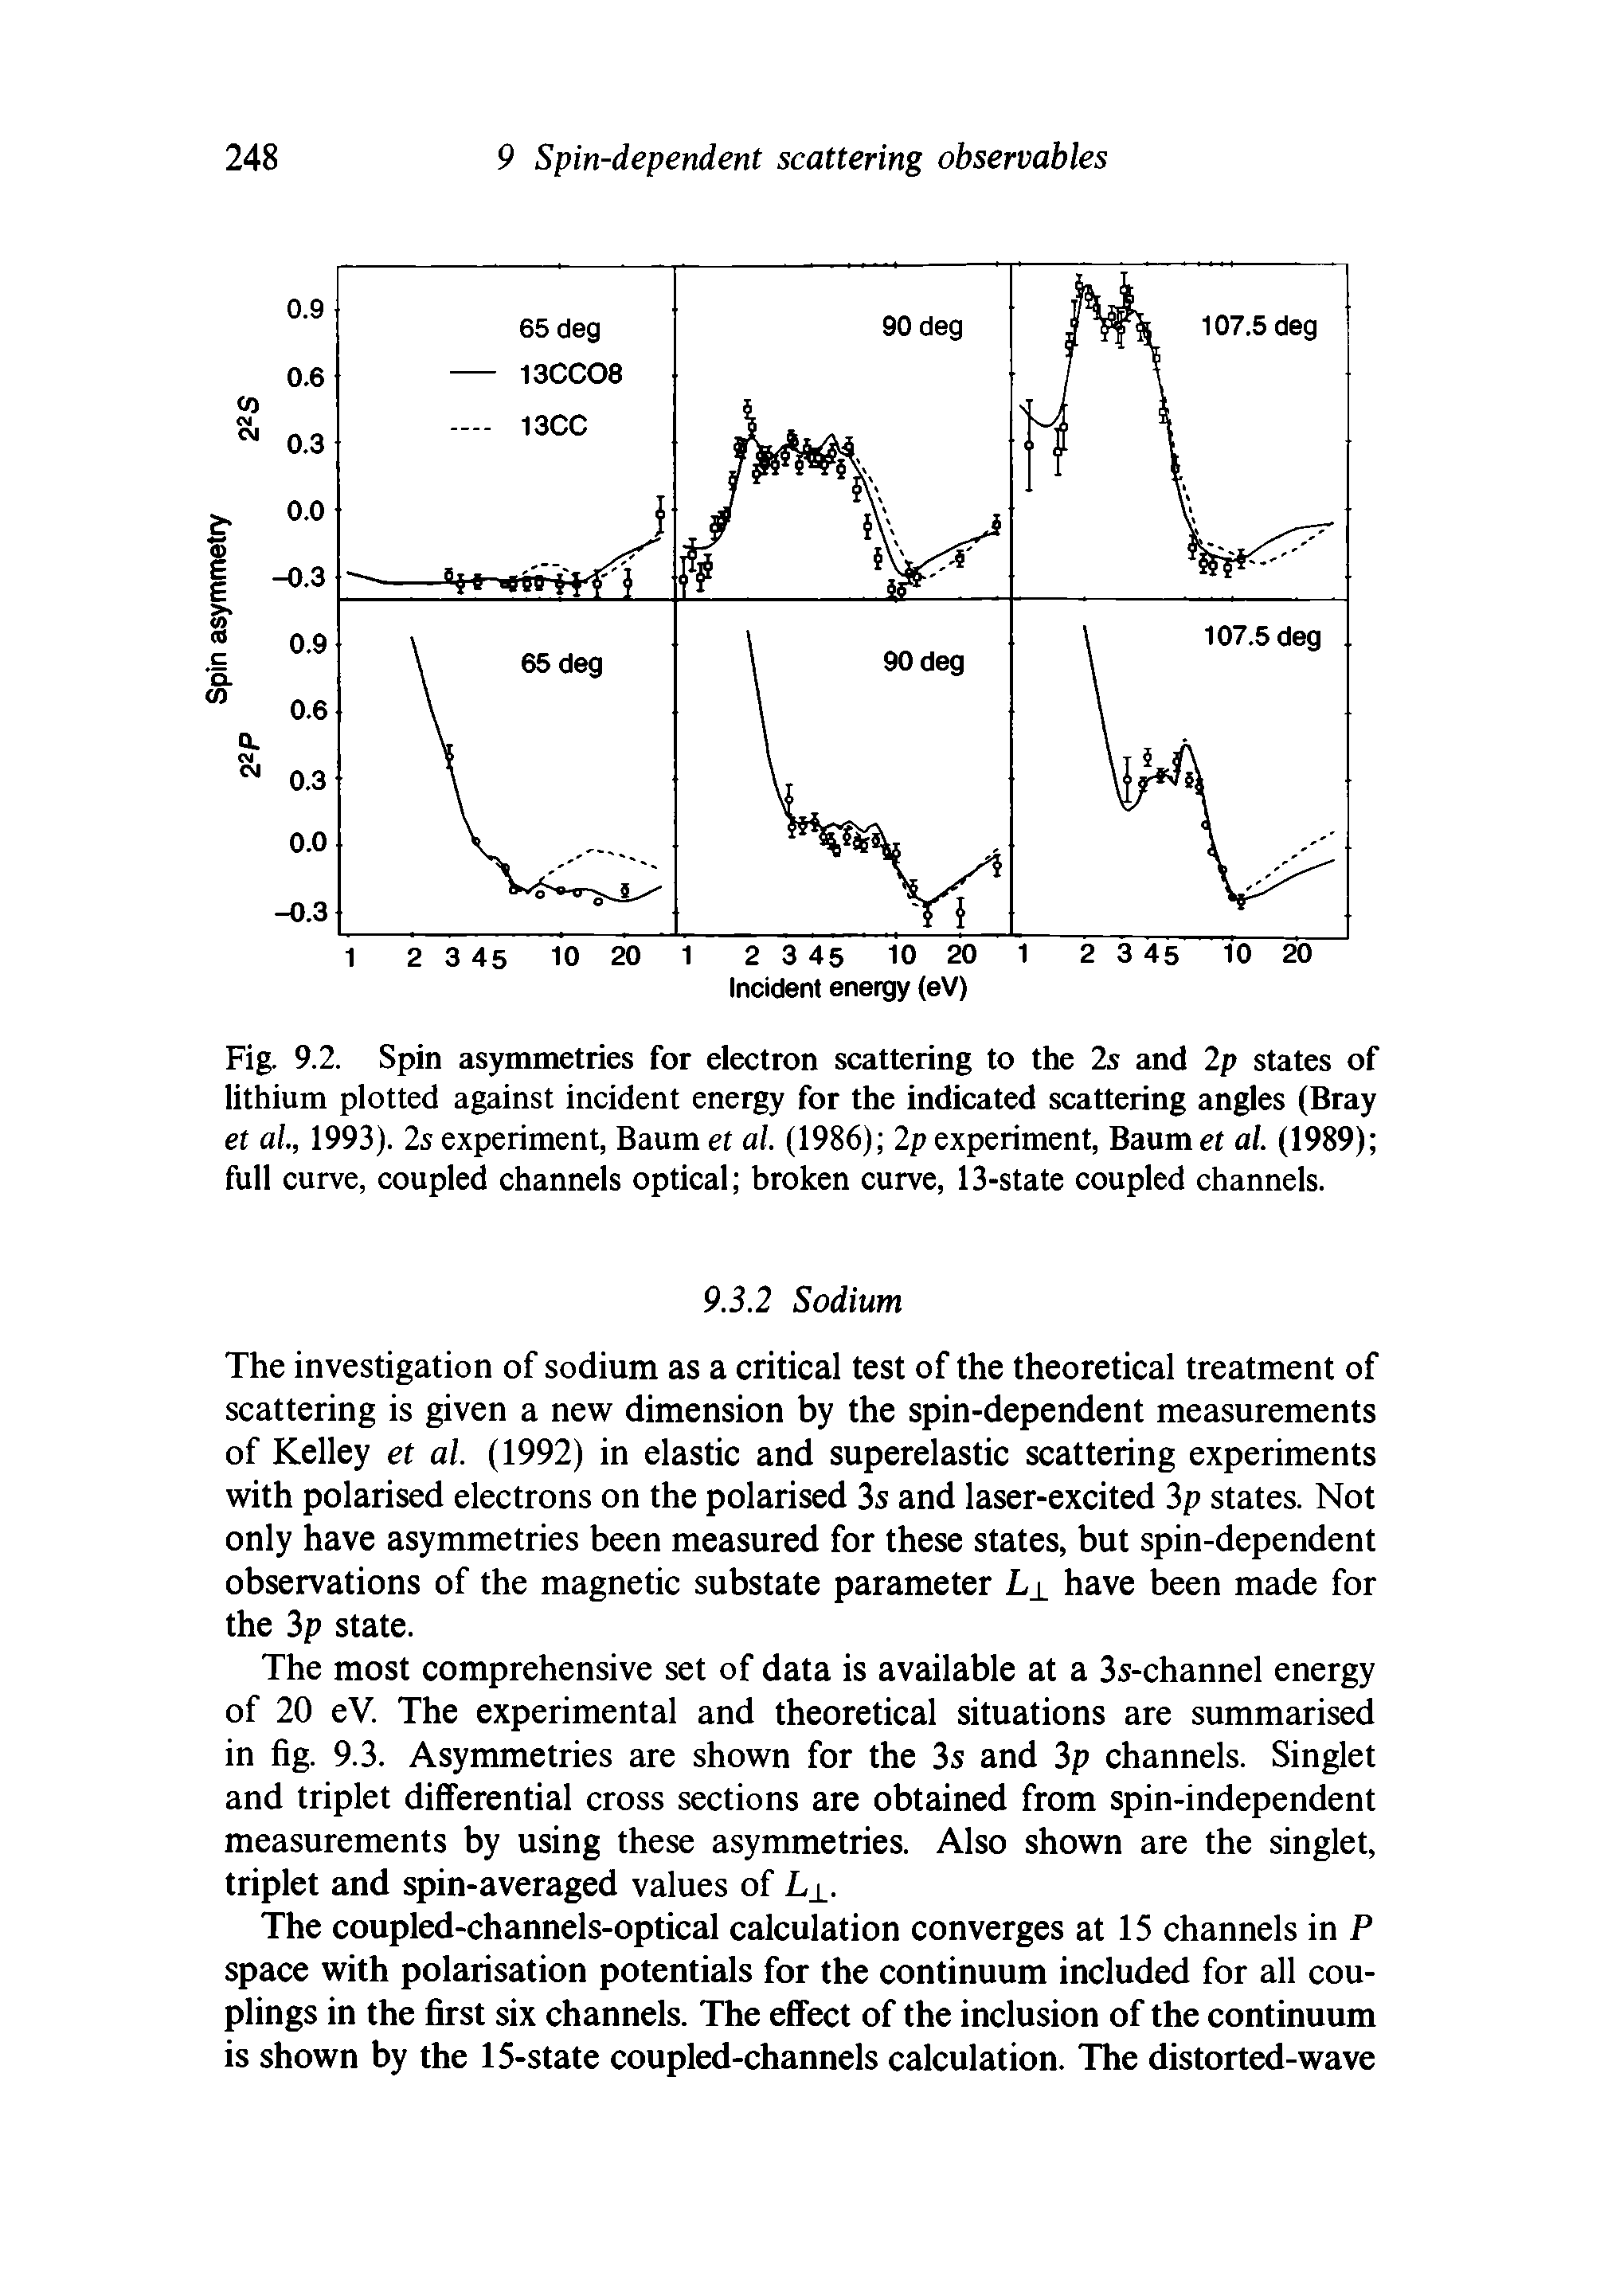 Fig. 9.2. Spin asymmetries for electron scattering to the 2s and 2p states of lithium plotted against incident energy for the indicated scattering angles (Bray et al, 1993). 2s experiment, Baum et al. (1986) 2p experiment, Baumet al. (1989) full curve, coupled channels optical broken curve, 13-state coupled channels.